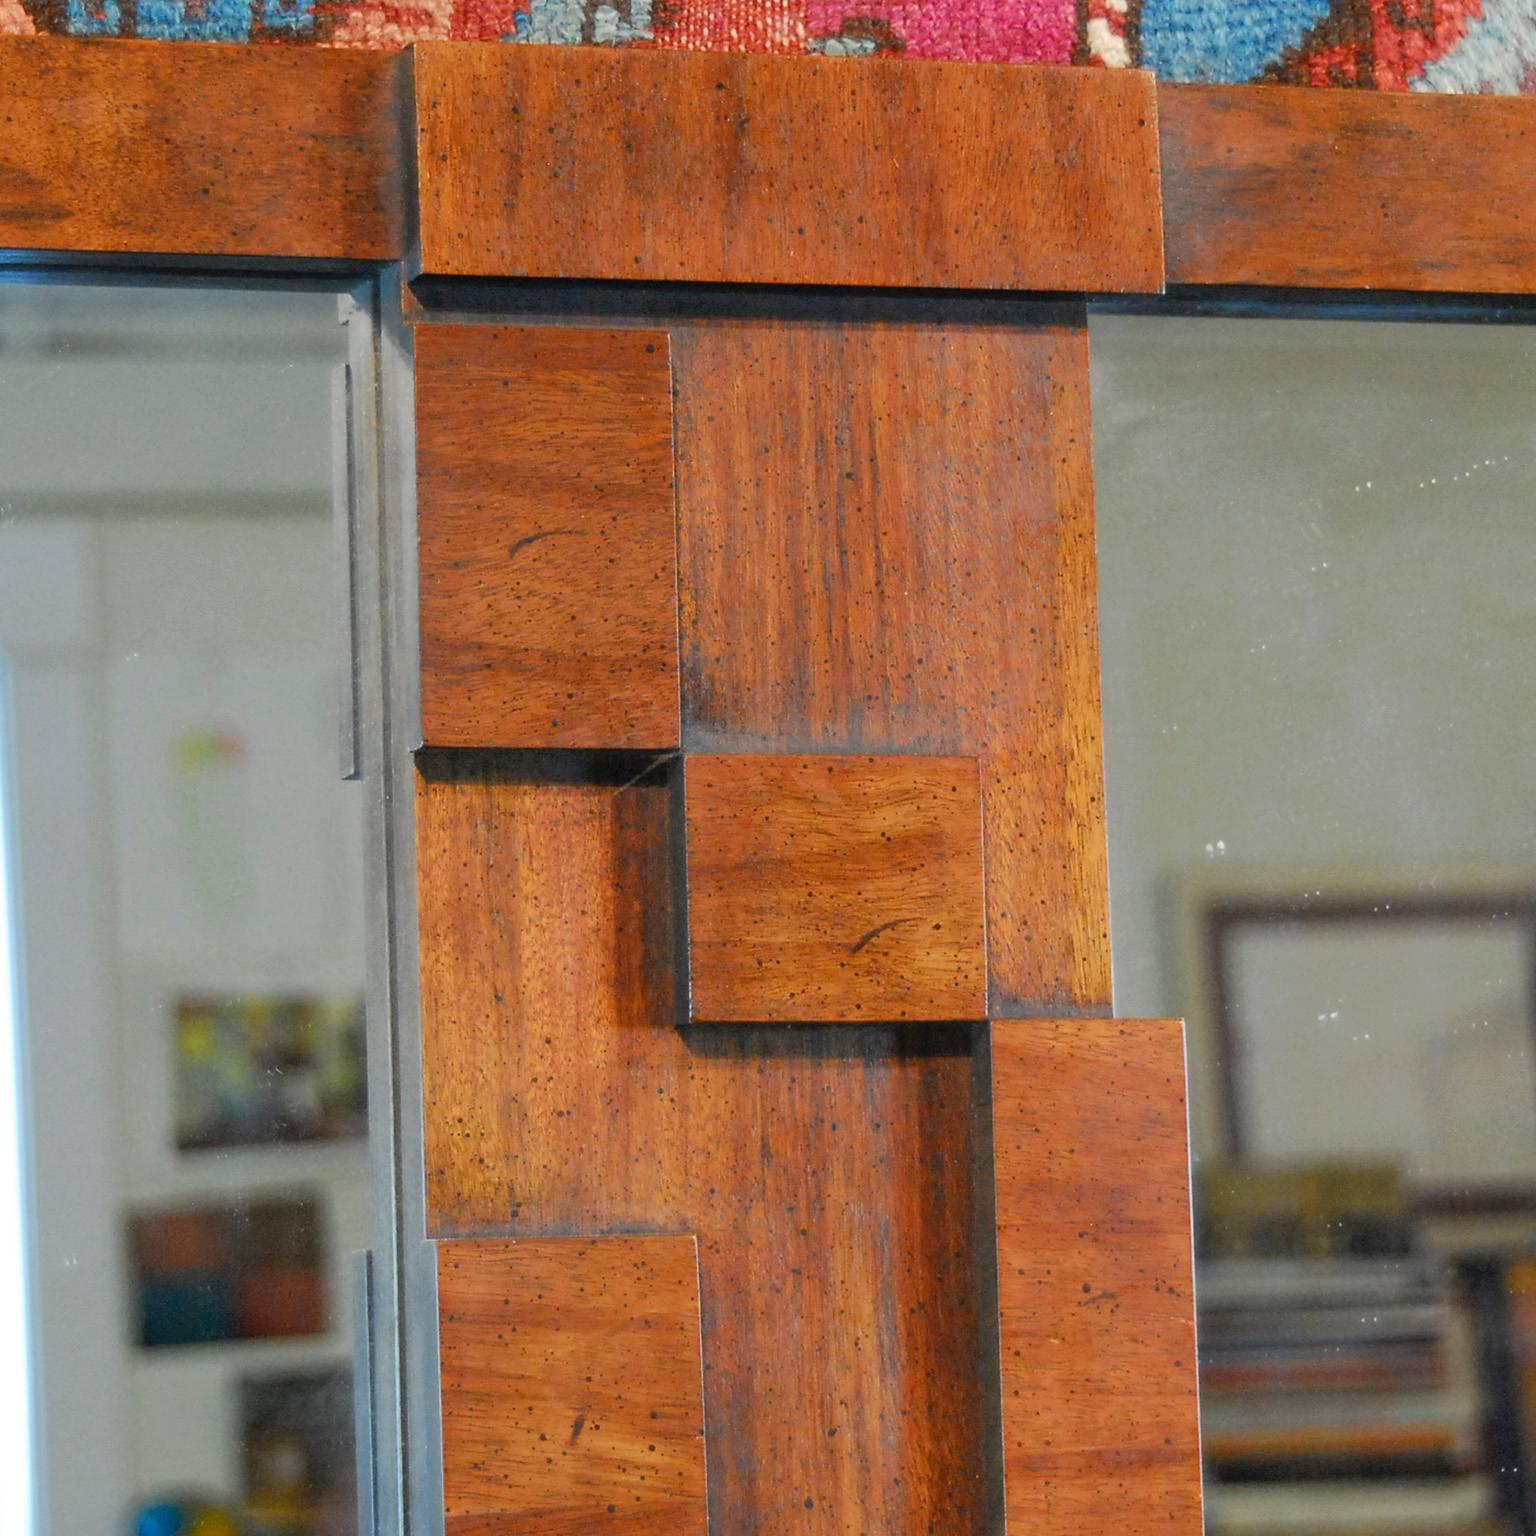 Mid-Century Modern Lane 'Paul Evans' style Brutalist walnut double mirror. Landscape over mantel mirror with rectangular blocks dividing each pane. Model and serial numbers 480-06/3570110.
Dimensions: 41 1/2 x 51 1/2 x 1 inch.